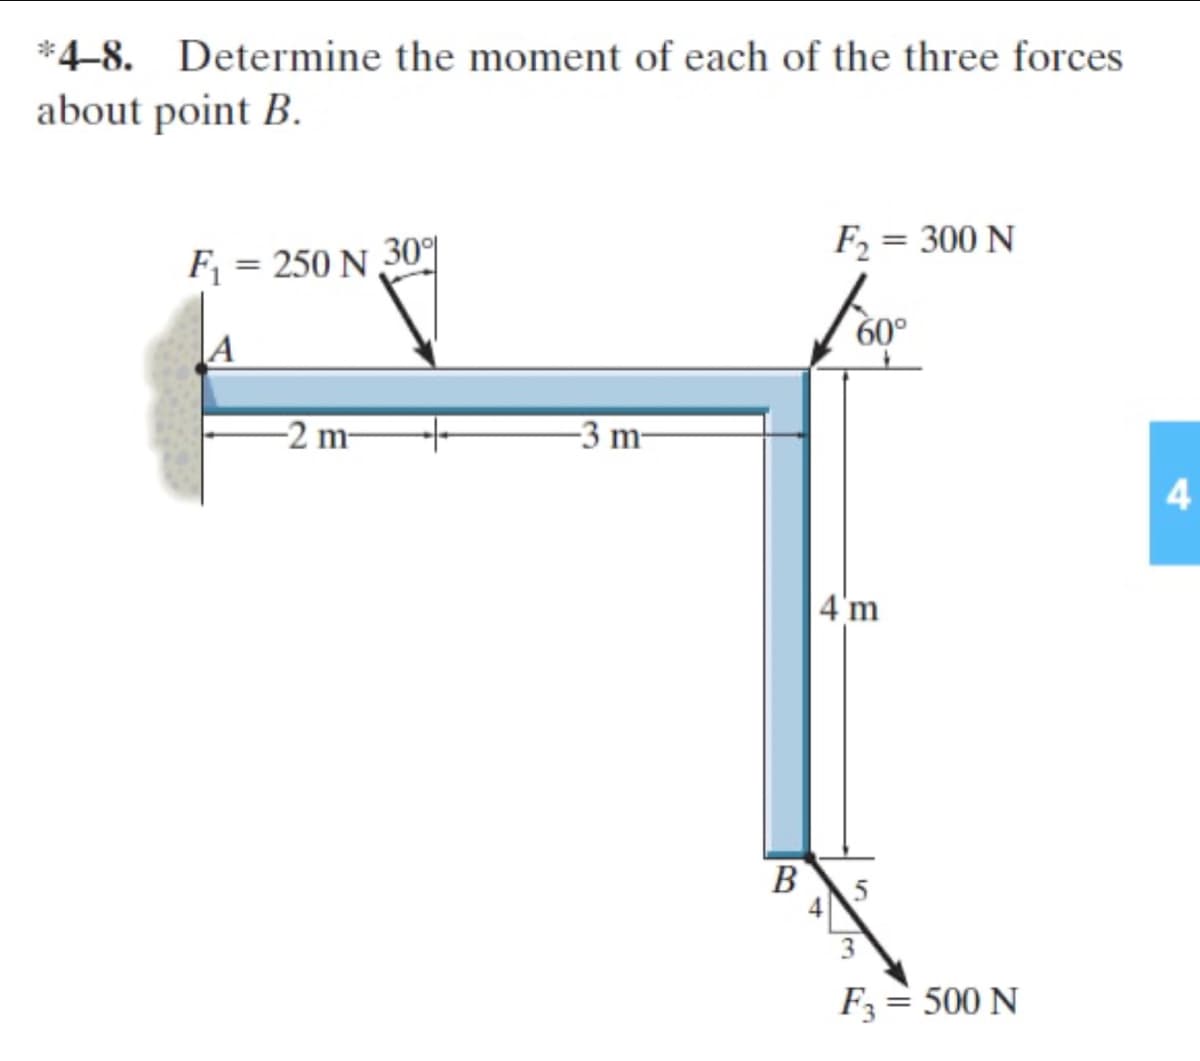 *4–8.
Determine the moment of each of the three forces
about point B.
Fj = 250 N
30
F2 = 300 N
60
-2 m-
-3 m-
4
4'm
В
3
F3= 500 N
